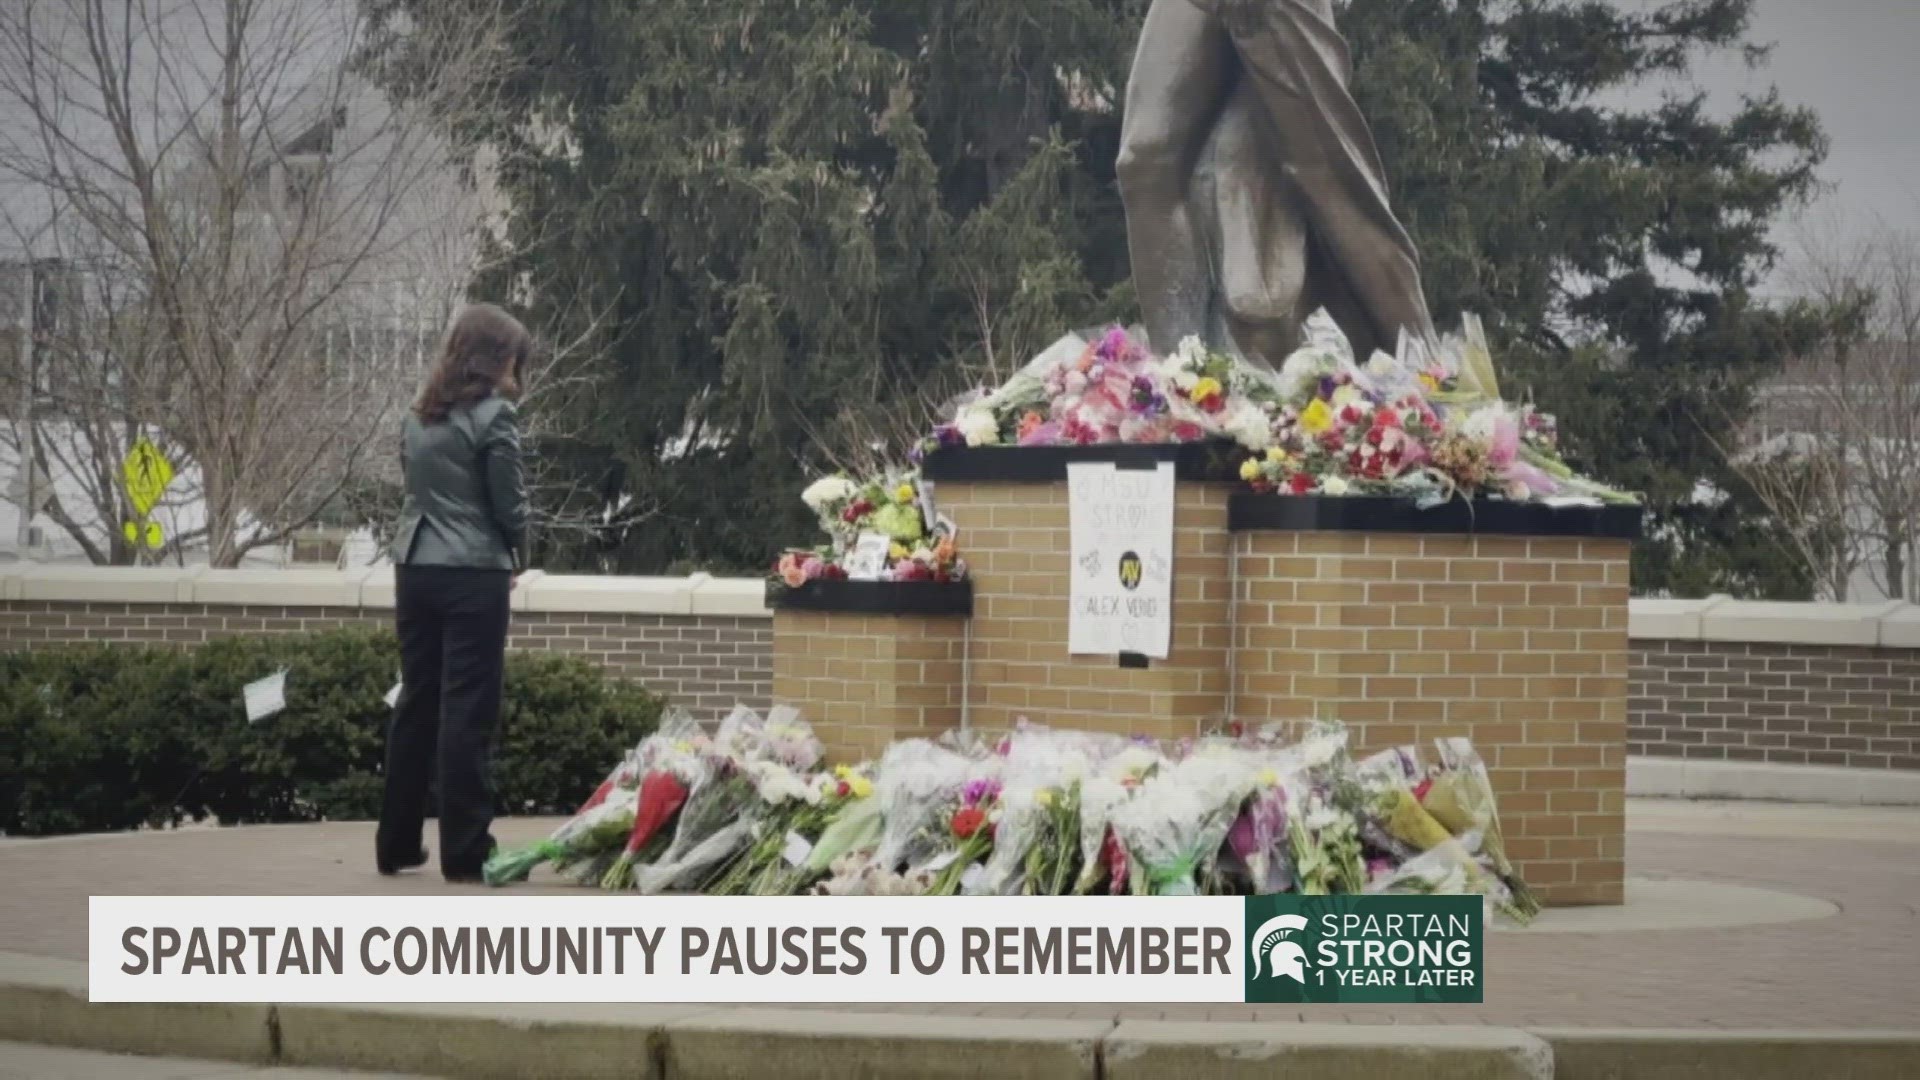 A gunman killed three Michigan State University students and wounded five others on Feb. 13, 2023. This is where the campus and community stand one year later.